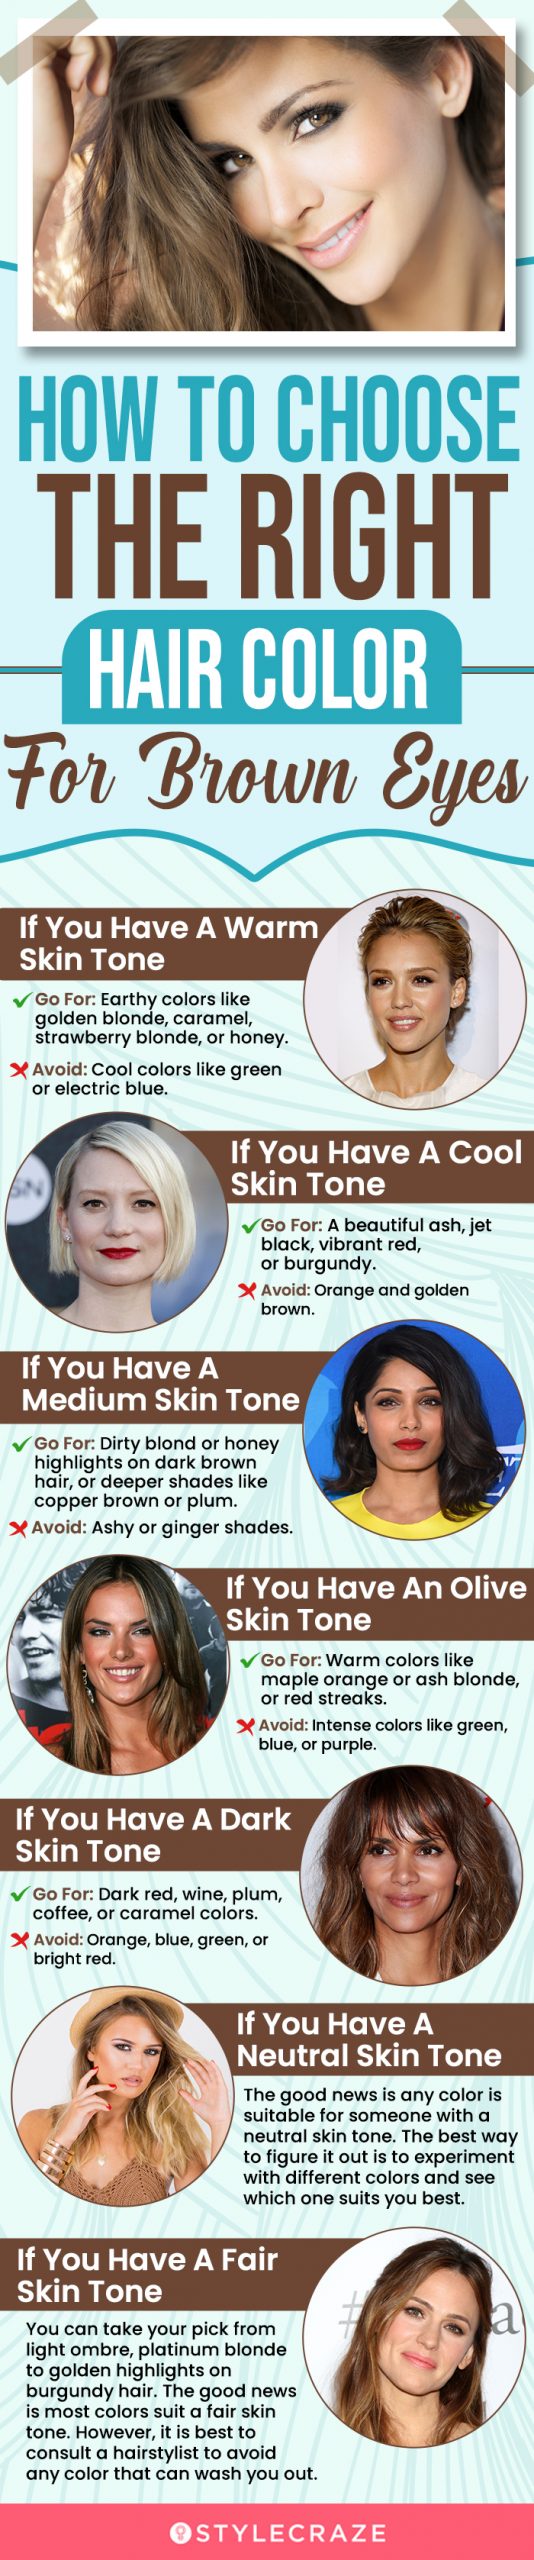 how to choose the right hair colour for brown eye (infographic)